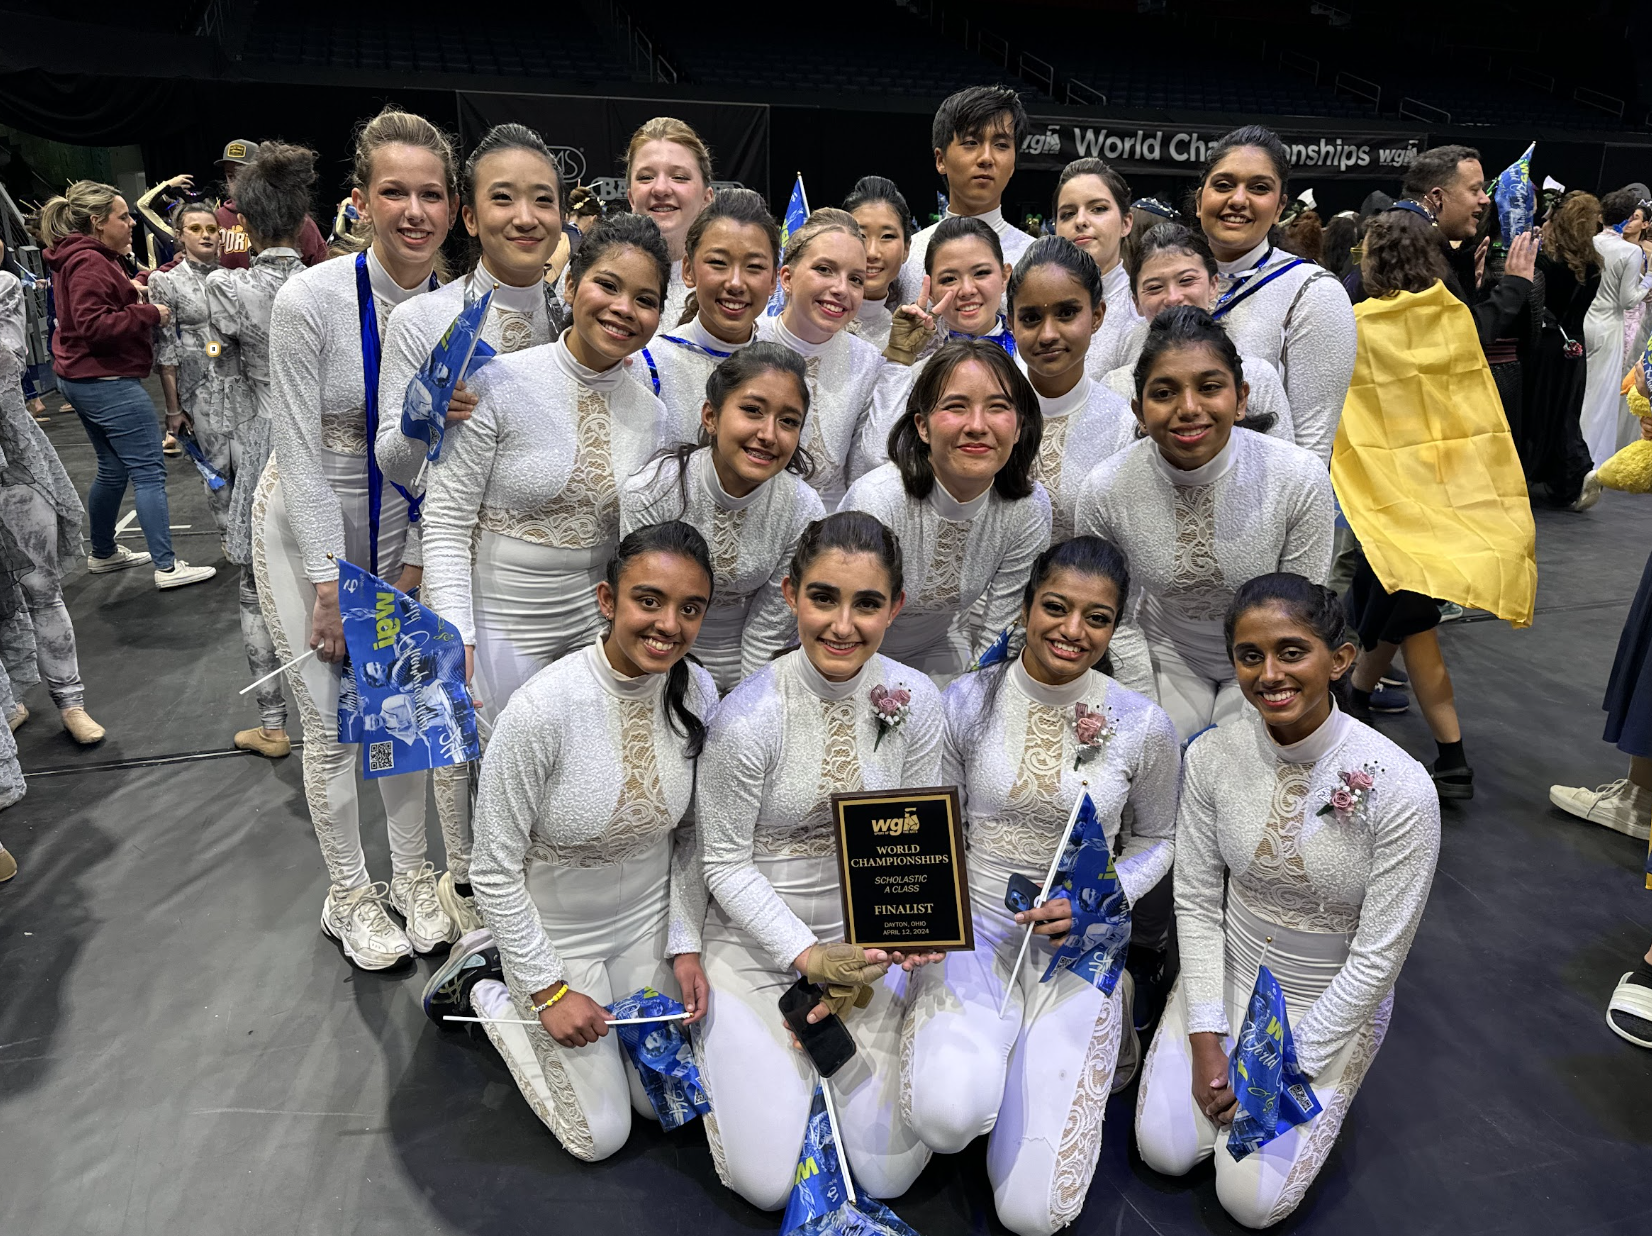 Trip to world championships: Varsity Winterguard achieve placement in Championships